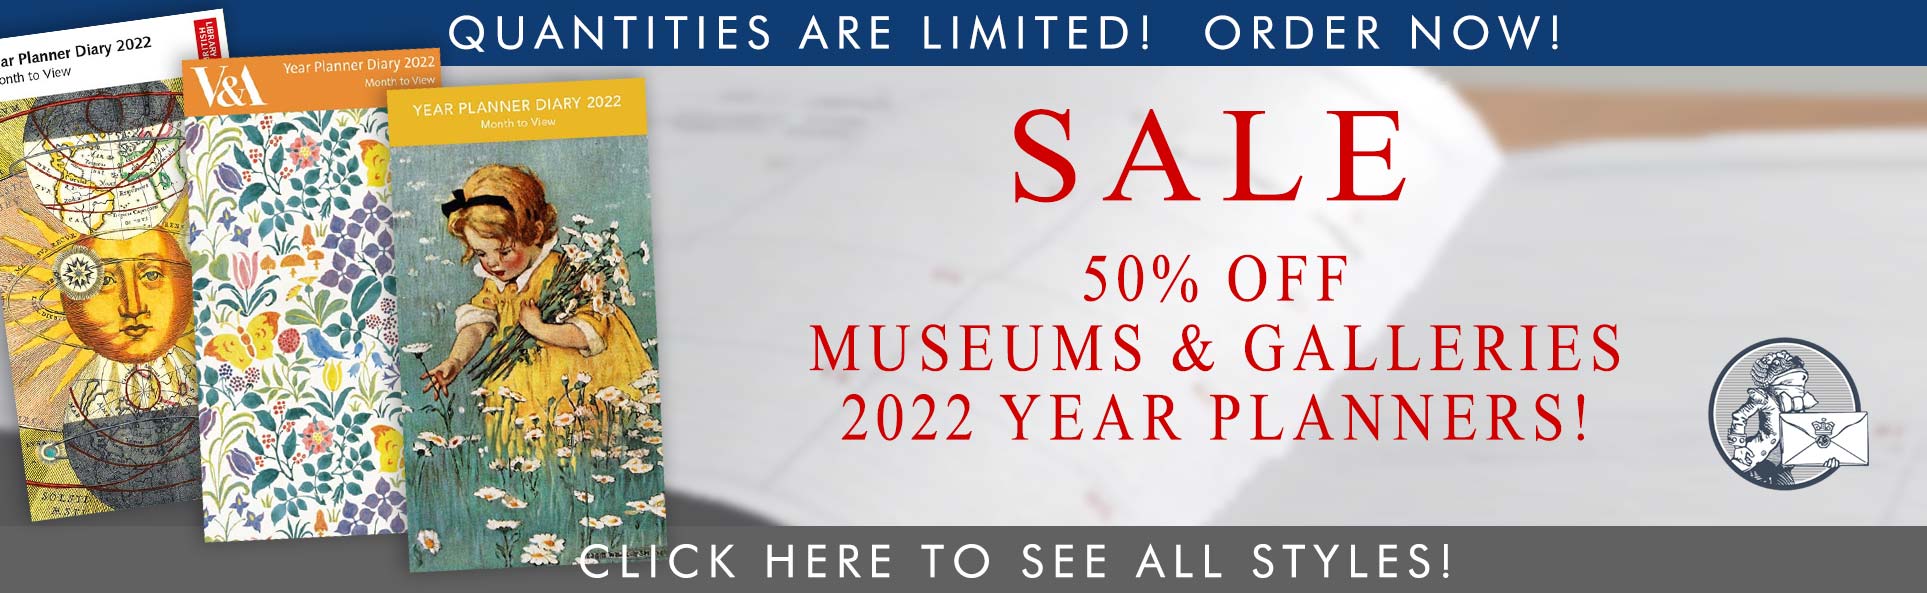 Sale!  50% Off Museums & Galleries 2022 Yearly Planners!